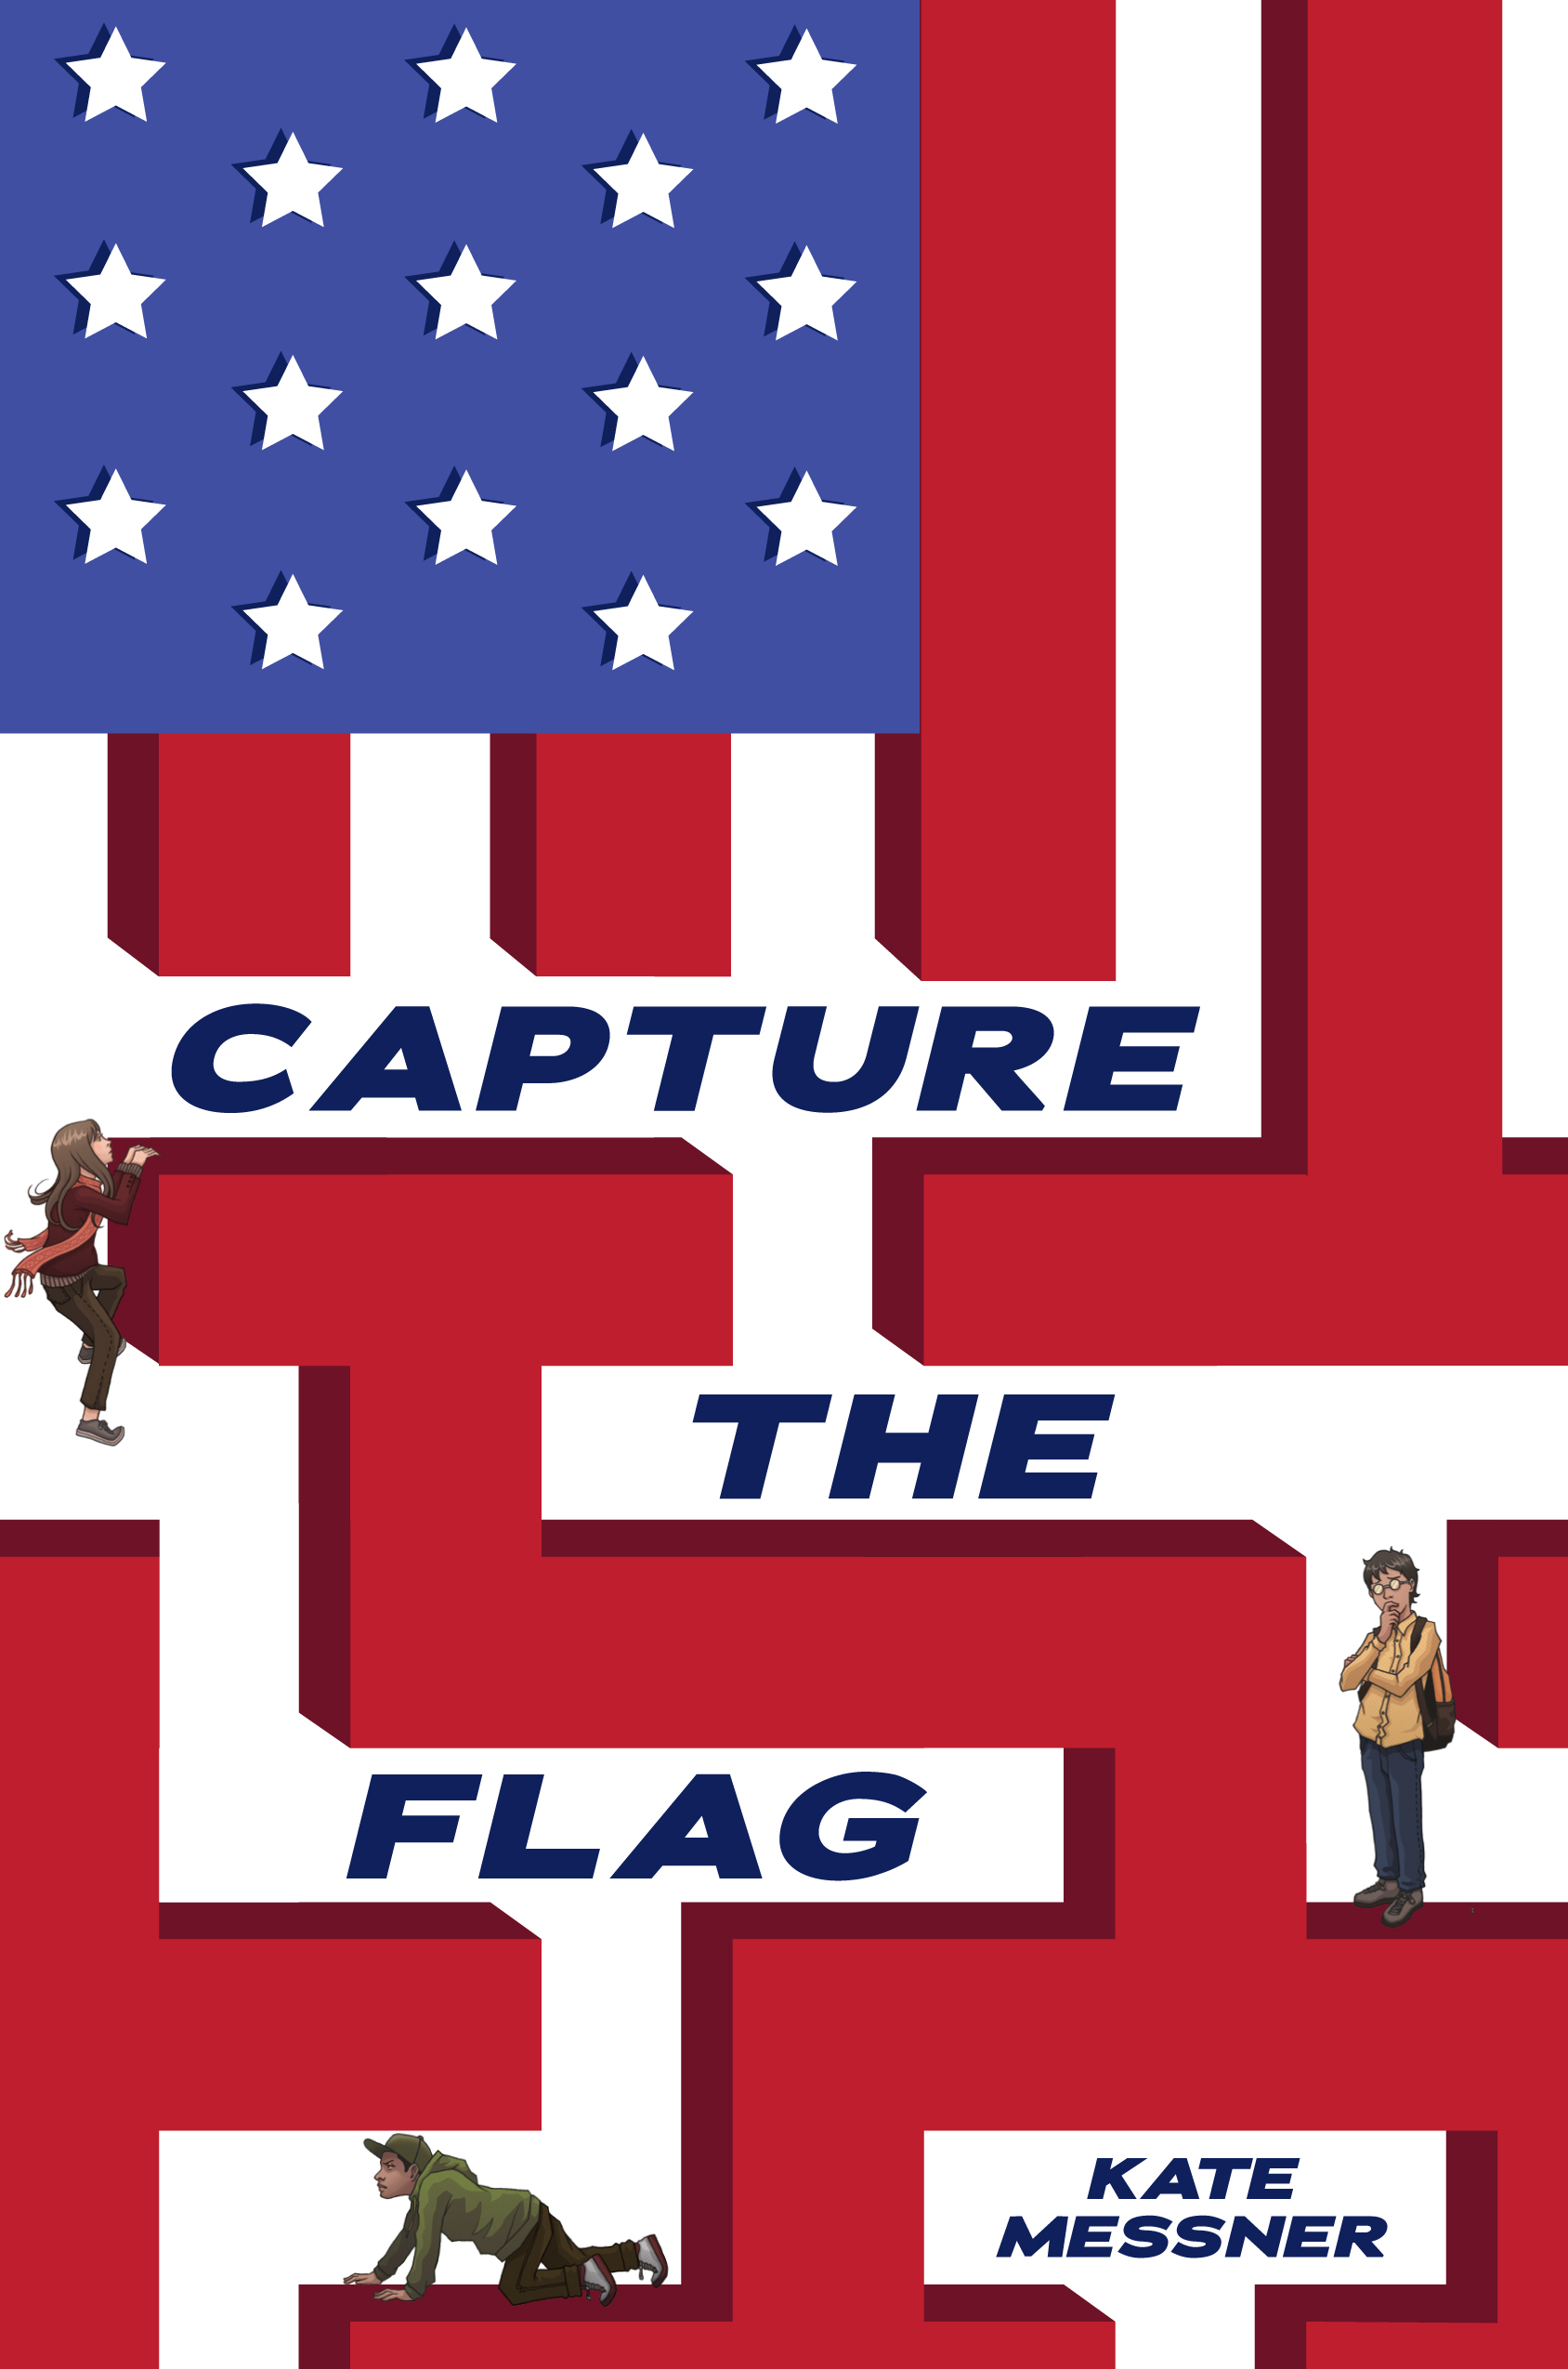 Capture The Flag Wallpapers Movie Hq Capture The Flag Pictures 4k Wallpapers 2019 - new capture the flag roblox